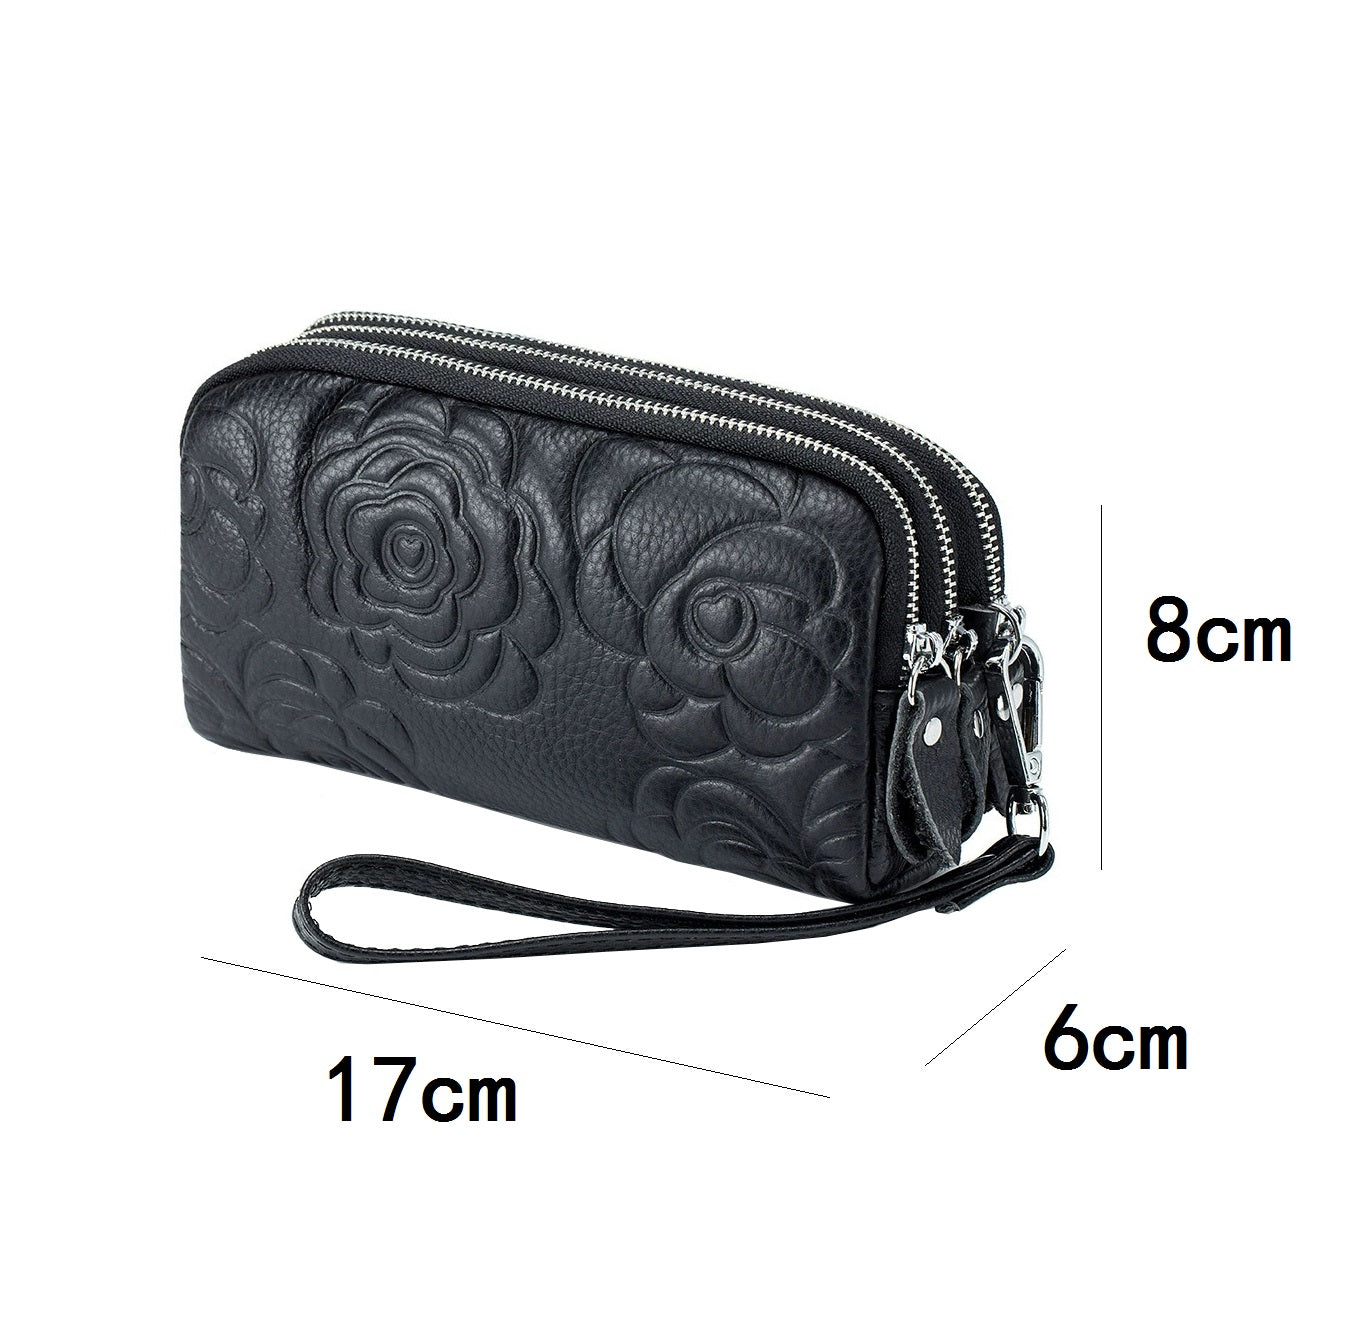 Women's cowhide leather floral pouch with triple zip